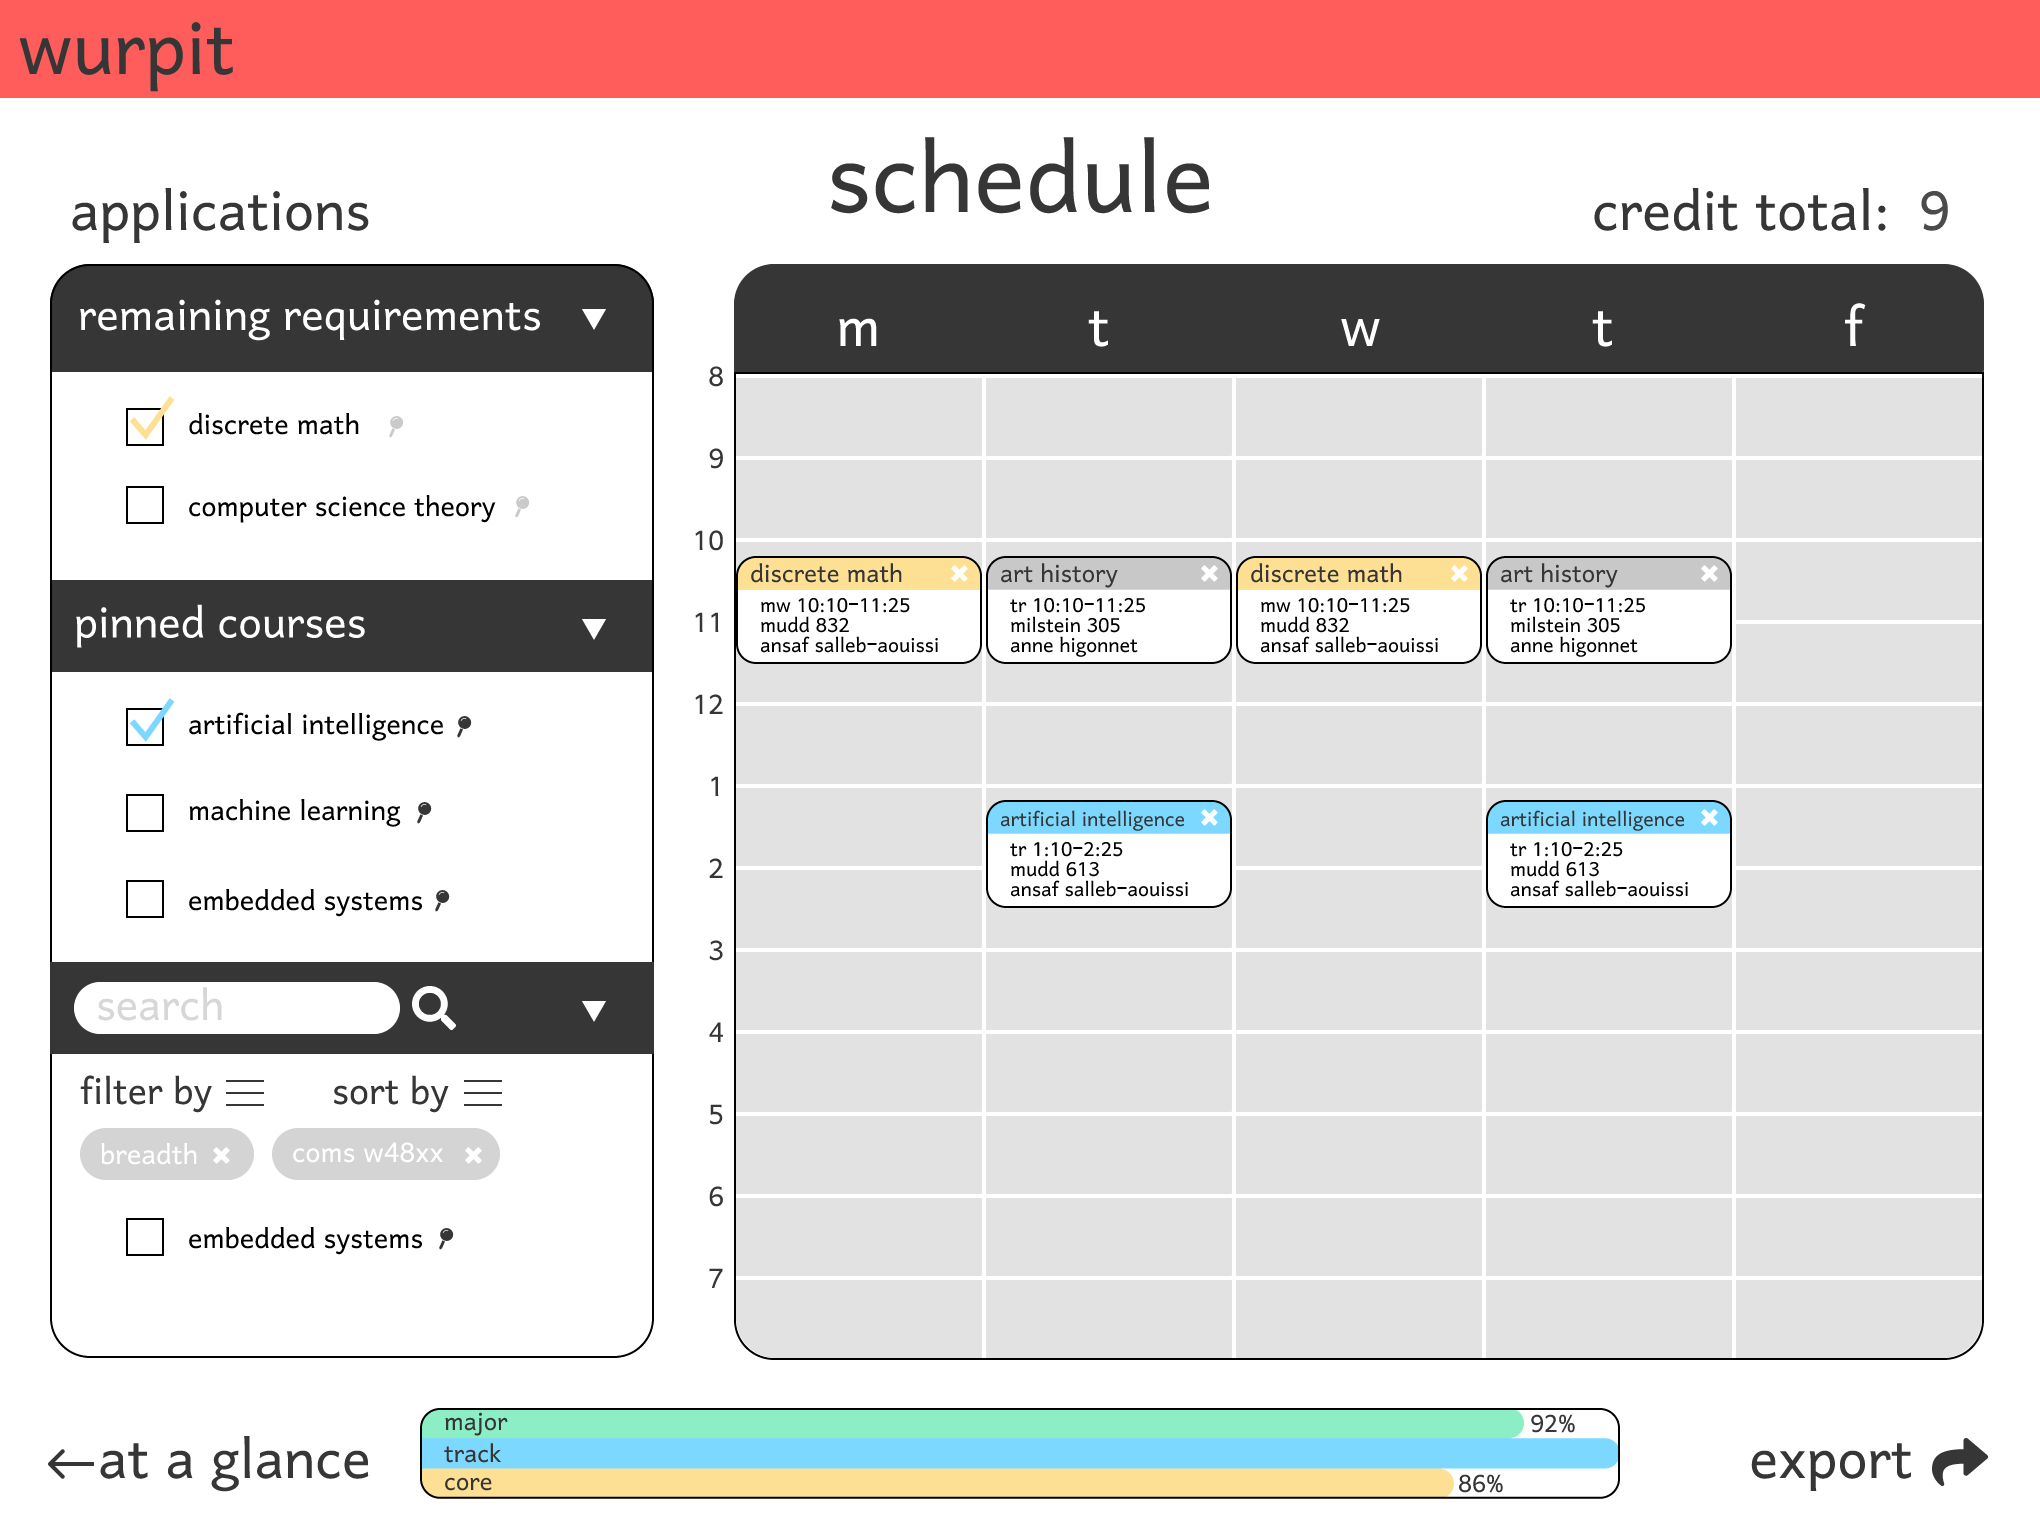 A gif of the interaction with a schedling page. On the first page, circular progress arcs can be seen on the left depicting the user's progress through their major. Then, on the right, an interactive checklist depicts which requirement(s) are needed to satisfy different track requirements for the student. On the page to the right, a weekly planner is shown on the right and a shortlist of classes can be filtered and searched on the left.